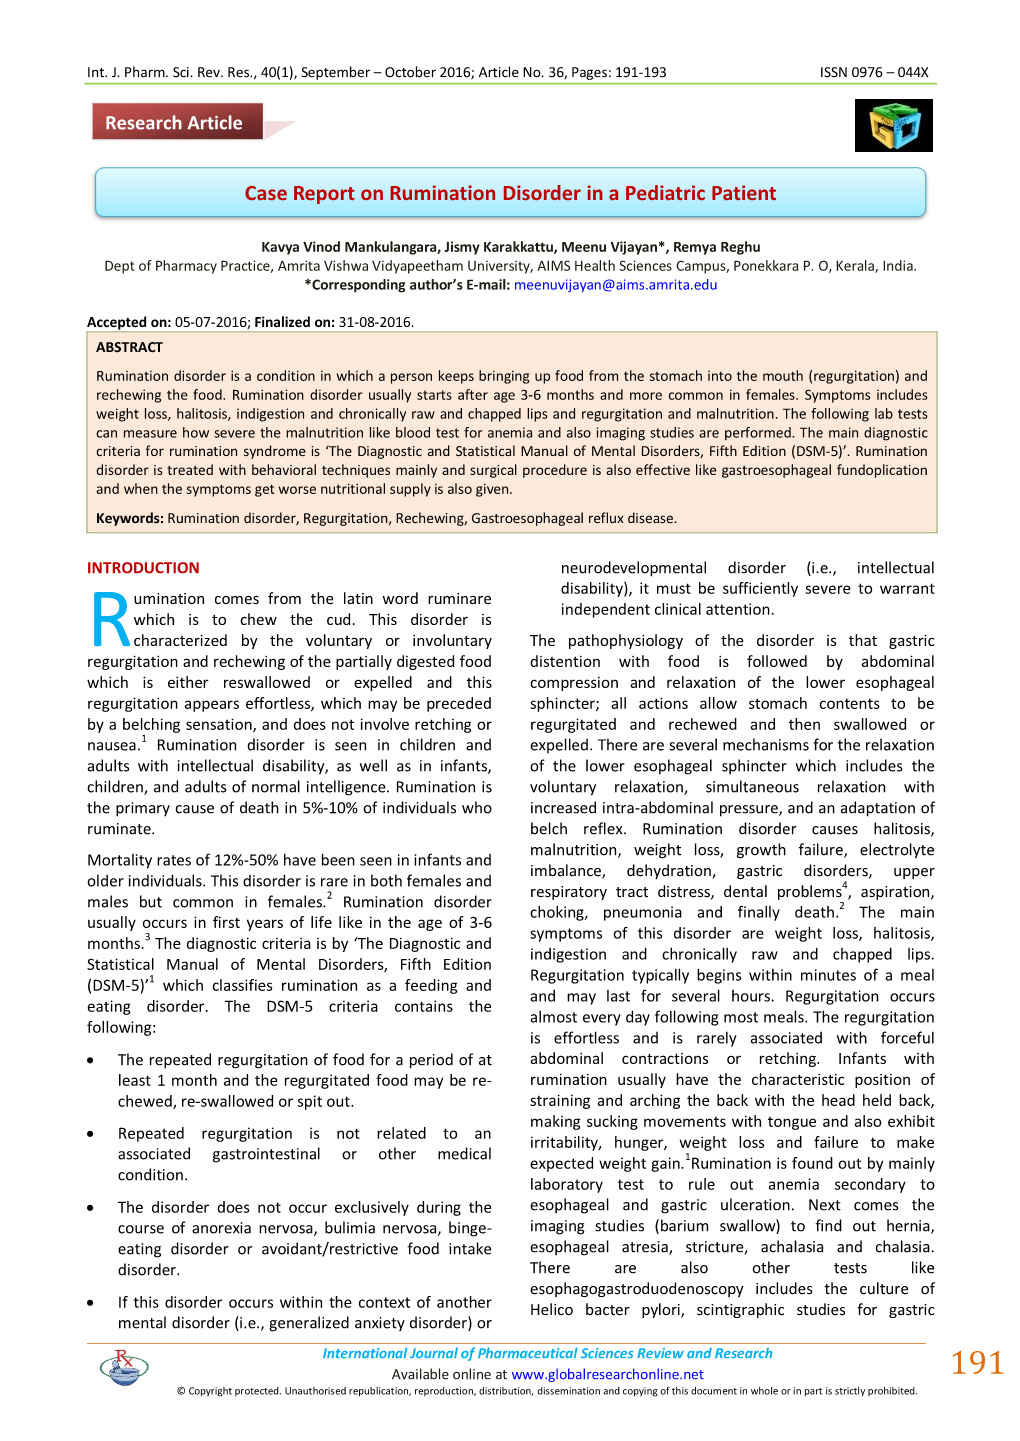 Case Report on Rumination Disorder in a Pediatric Patient